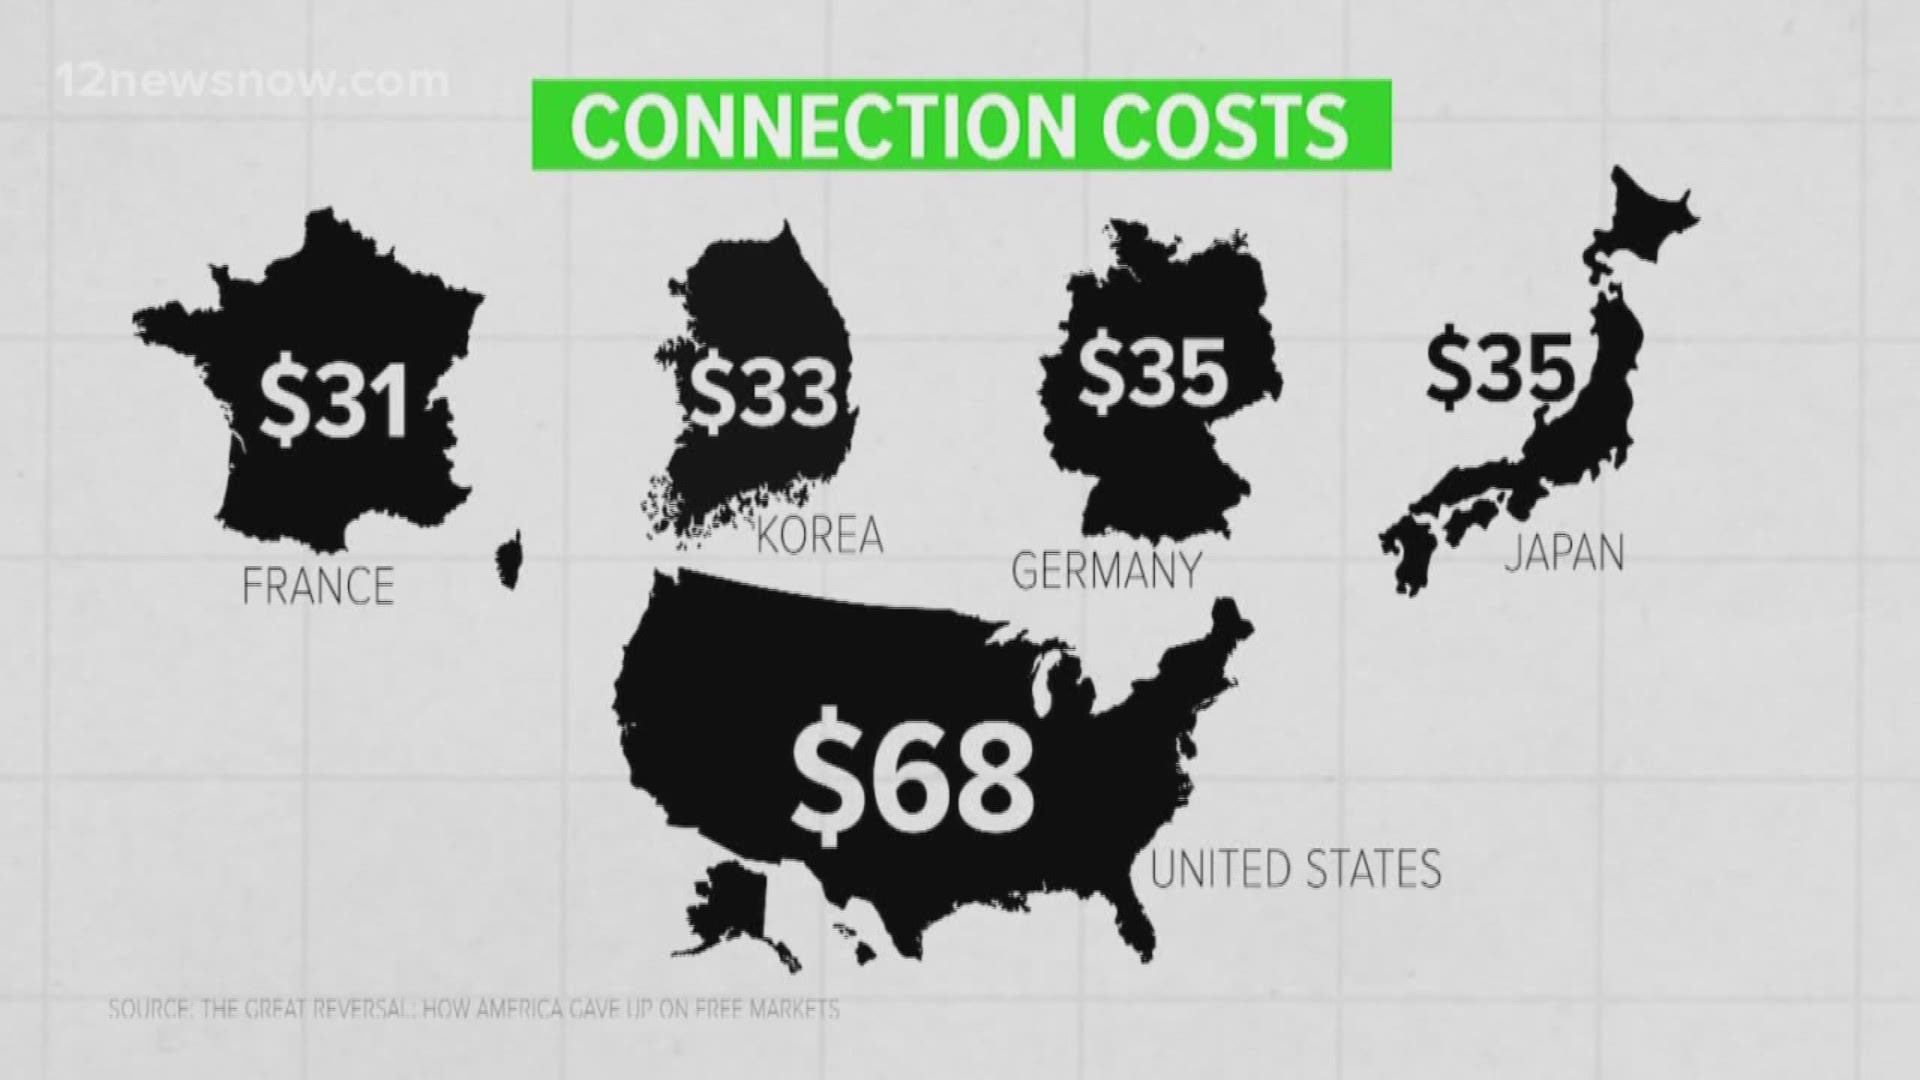 Home internet in the US is more expensive than other countries, according to a study at NYU.